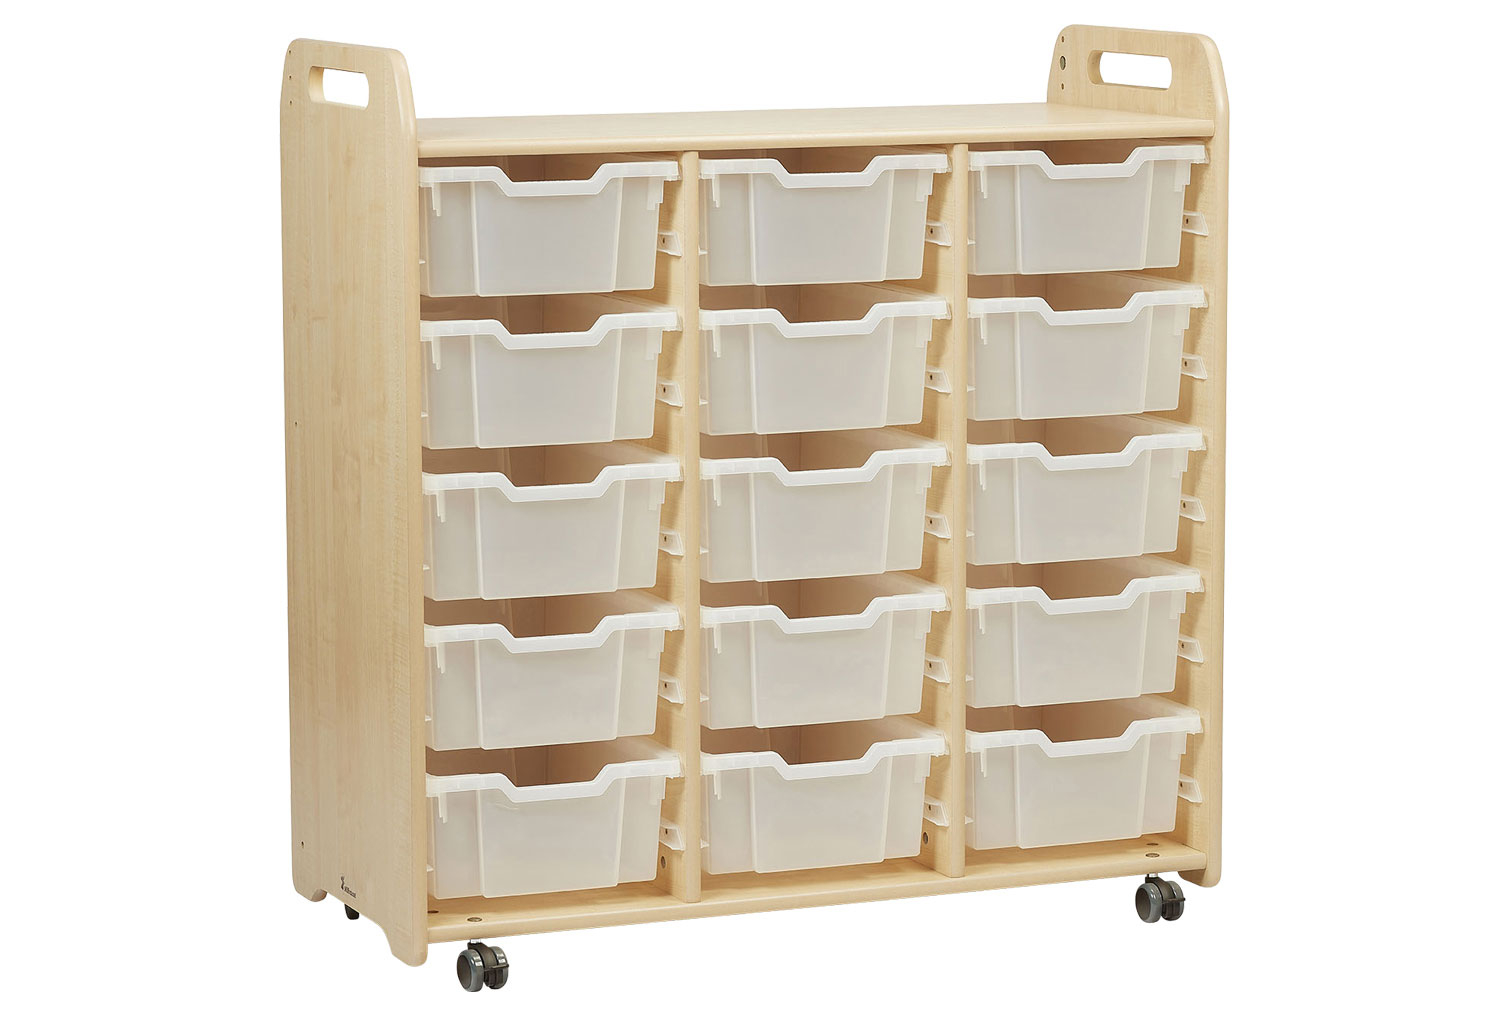 Early Years Tray Storage Unit With 15 Deep Trays (108cm High), Clear Trays